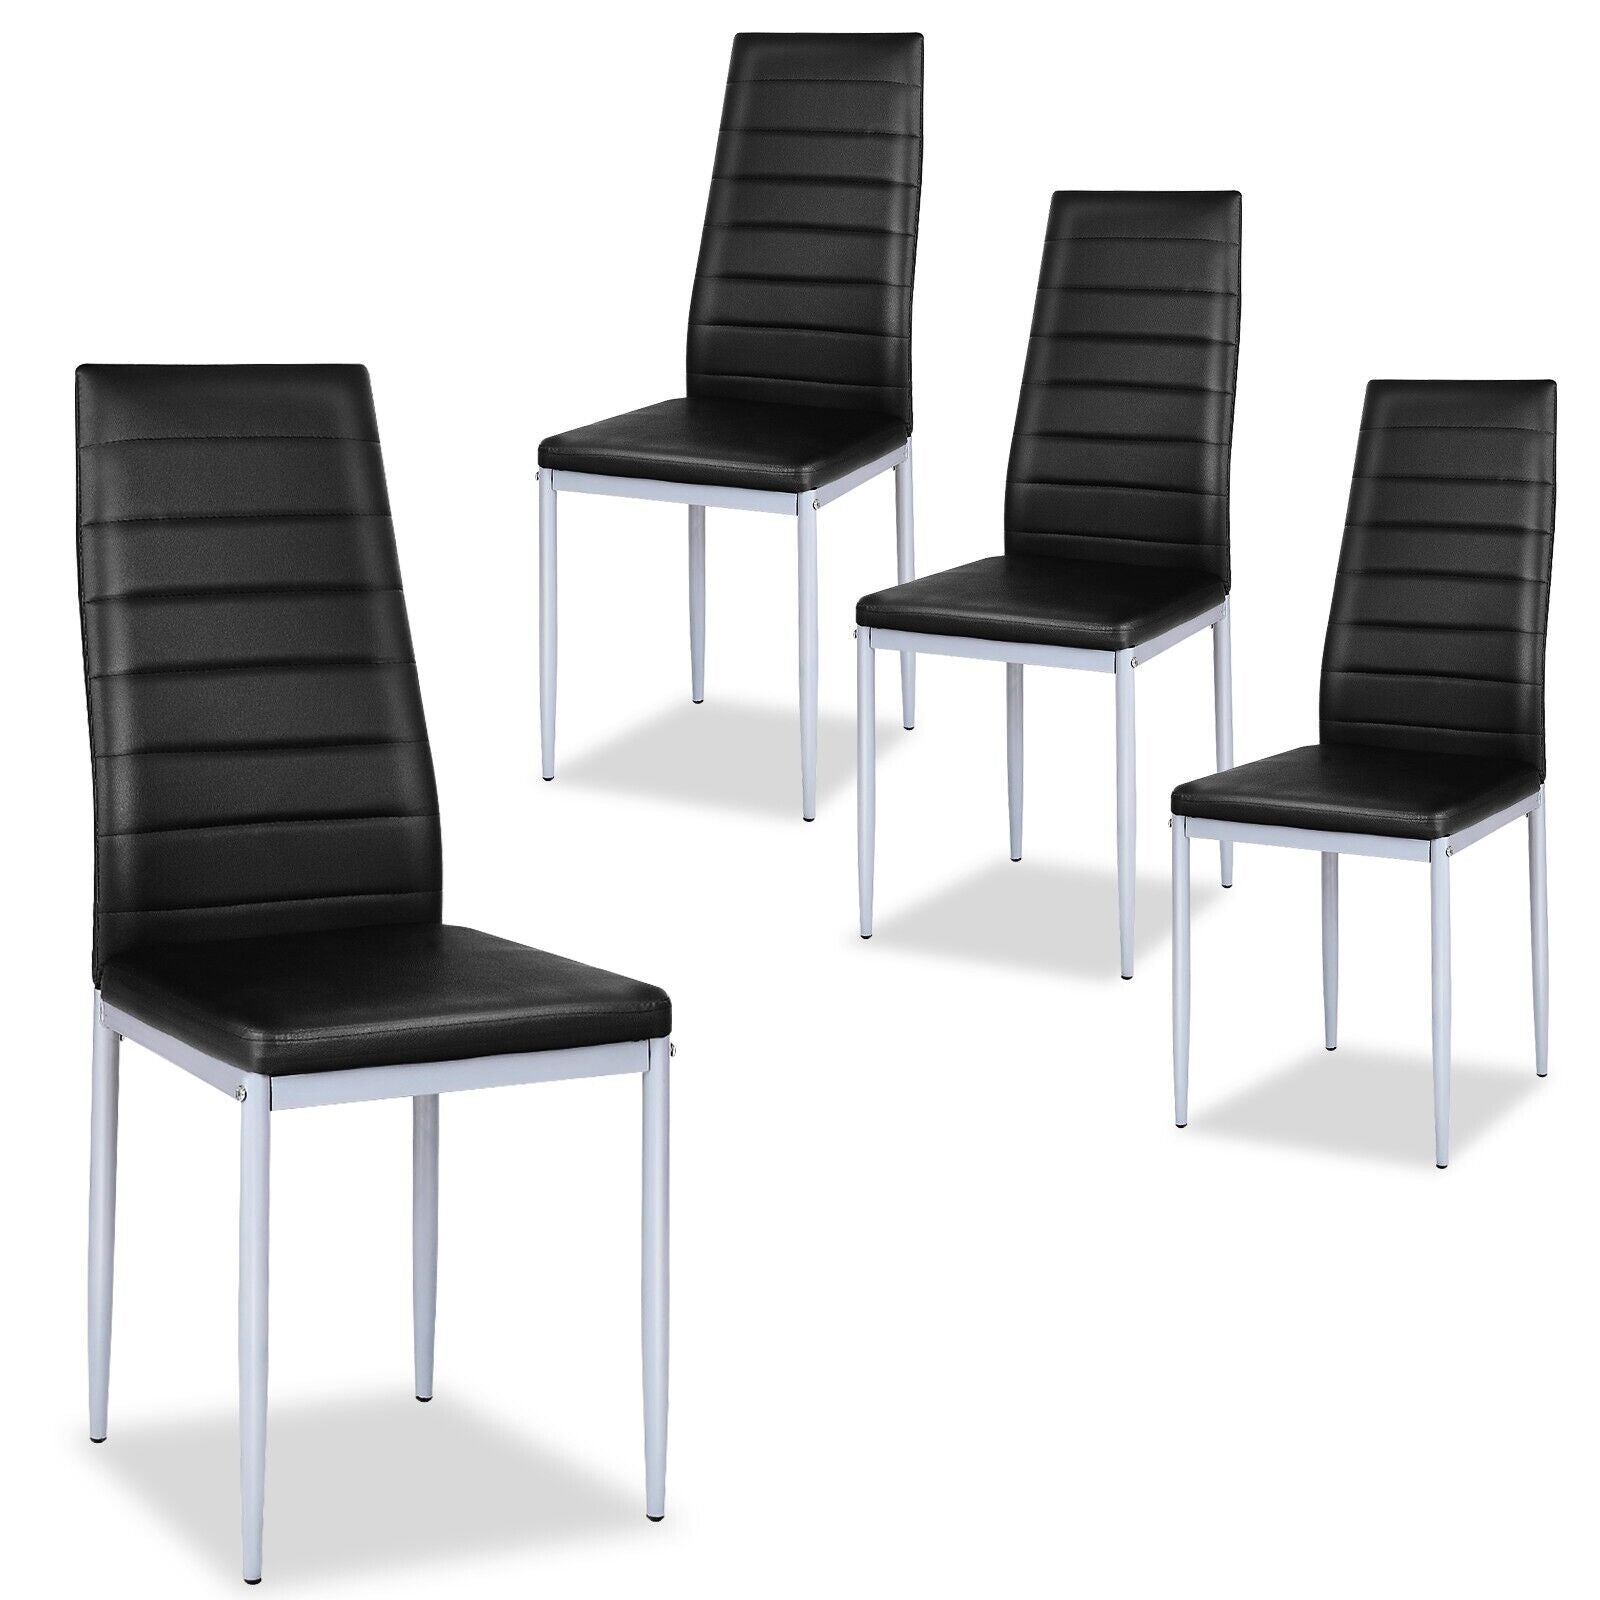 Set of 4 Armless Upholstered Dining Chairs with High Back-Black